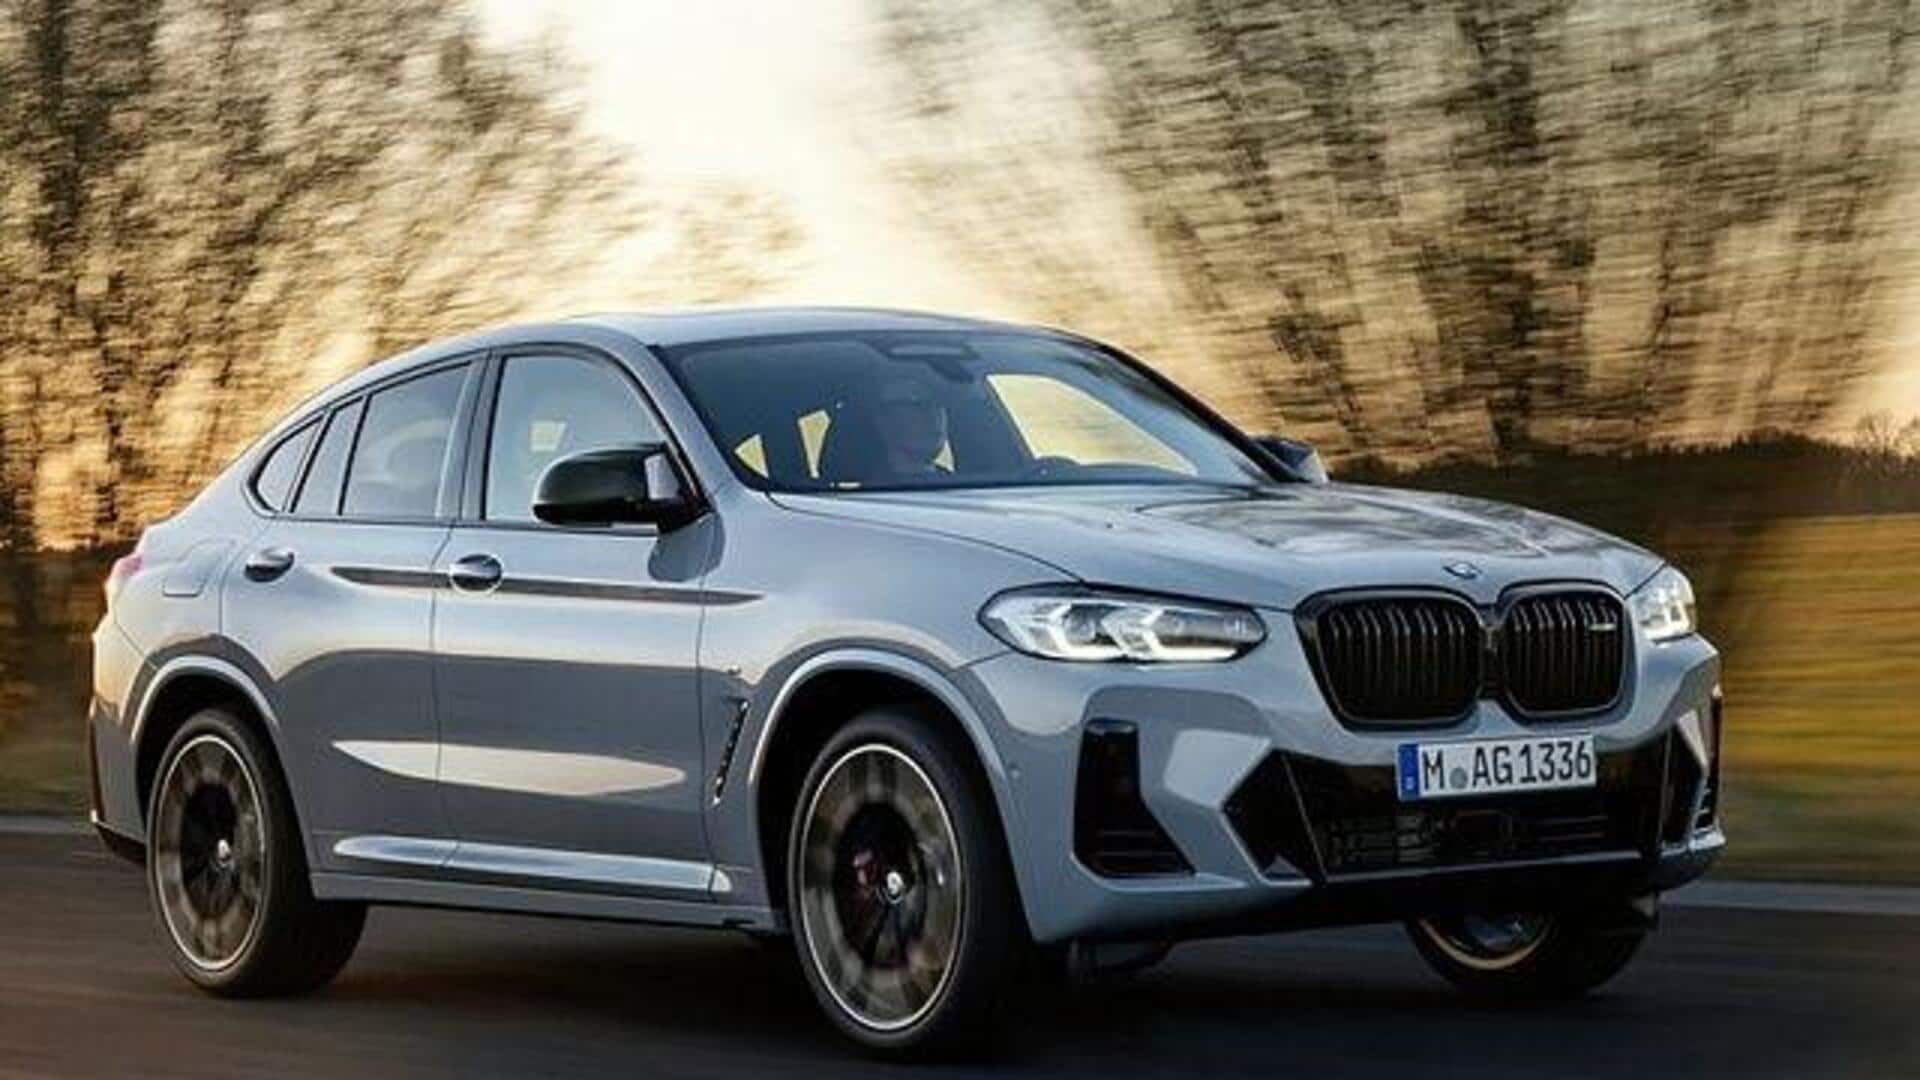 BMW X4 M40i to be launched on October 26